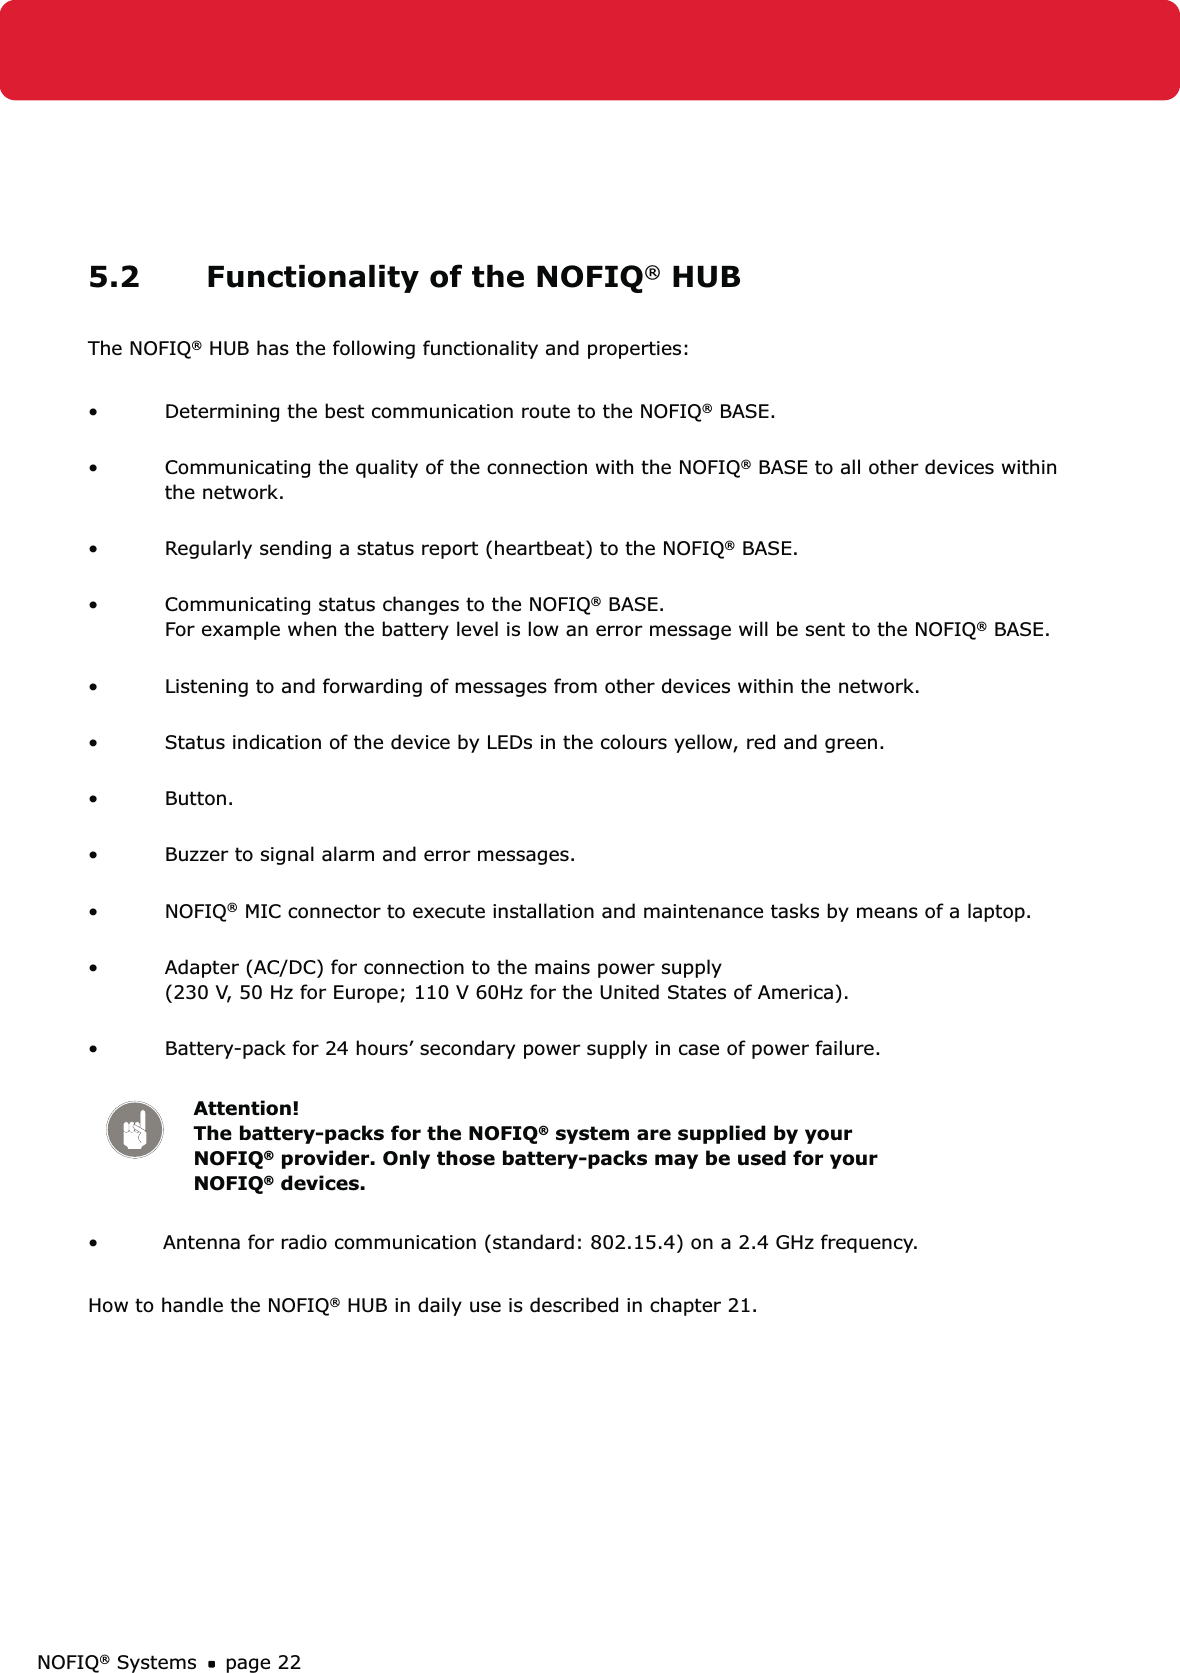 NOFIQ® Systems page 225.2  Functionality of the NOFIQ® HUBThe NOFIQ® HUB has the following functionality and properties:Determining the best communication route to the NOFIQ•  ® BASE. Communicating the quality of the connection with the NOFIQ•  ® BASE to all other devices within the network. Regularly sending a status report (heartbeat) to the NOFIQ•  ® BASE. Communicating status changes to the NOFIQ•  ® BASE.  For example when the battery level is low an error message will be sent to the NOFIQ® BASE.  Listening to and forwarding of messages from other devices within the network. • Status indication of the device by LEDs in the colours yellow, red and green. • Button. • Buzzer to signal alarm and error messages. • NOFIQ•  ® MIC connector to execute installation and maintenance tasks by means of a laptop. Adapter (AC/DC) for connection to the mains power supply  • (230 V, 50 Hz for Europe; 110 V 60Hz for the United States of America). Battery-pack for 24 hours’ secondary power supply in case of power failure.  • Attention! The battery-packs for the NOFIQ® system are supplied by your NOFIQ® provider. Only those battery-packs may be used for your NOFIQ® devices.•    Antenna for radio communication (standard: 802.15.4) on a 2.4 GHz frequency.How to handle the NOFIQ® HUB in daily use is described in chapter 21.